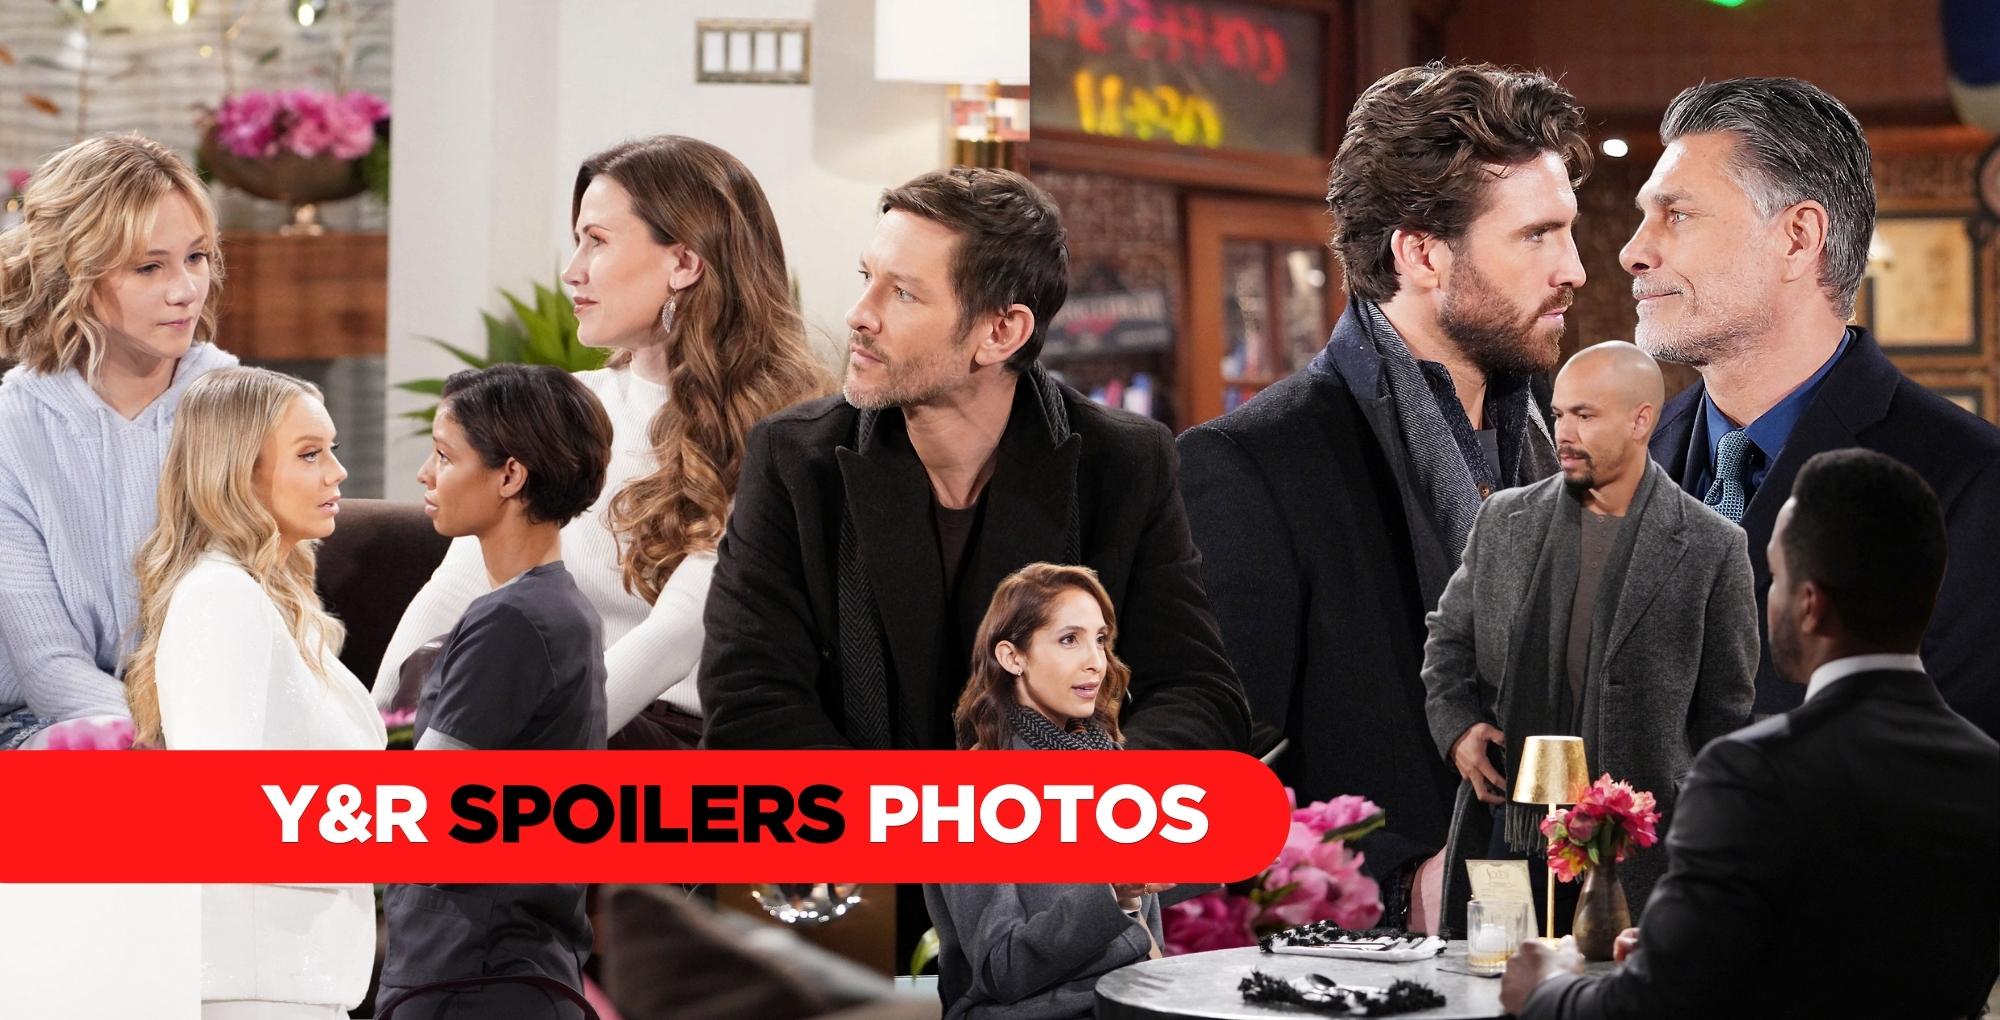 y&r spoilers photos for friday, february 24